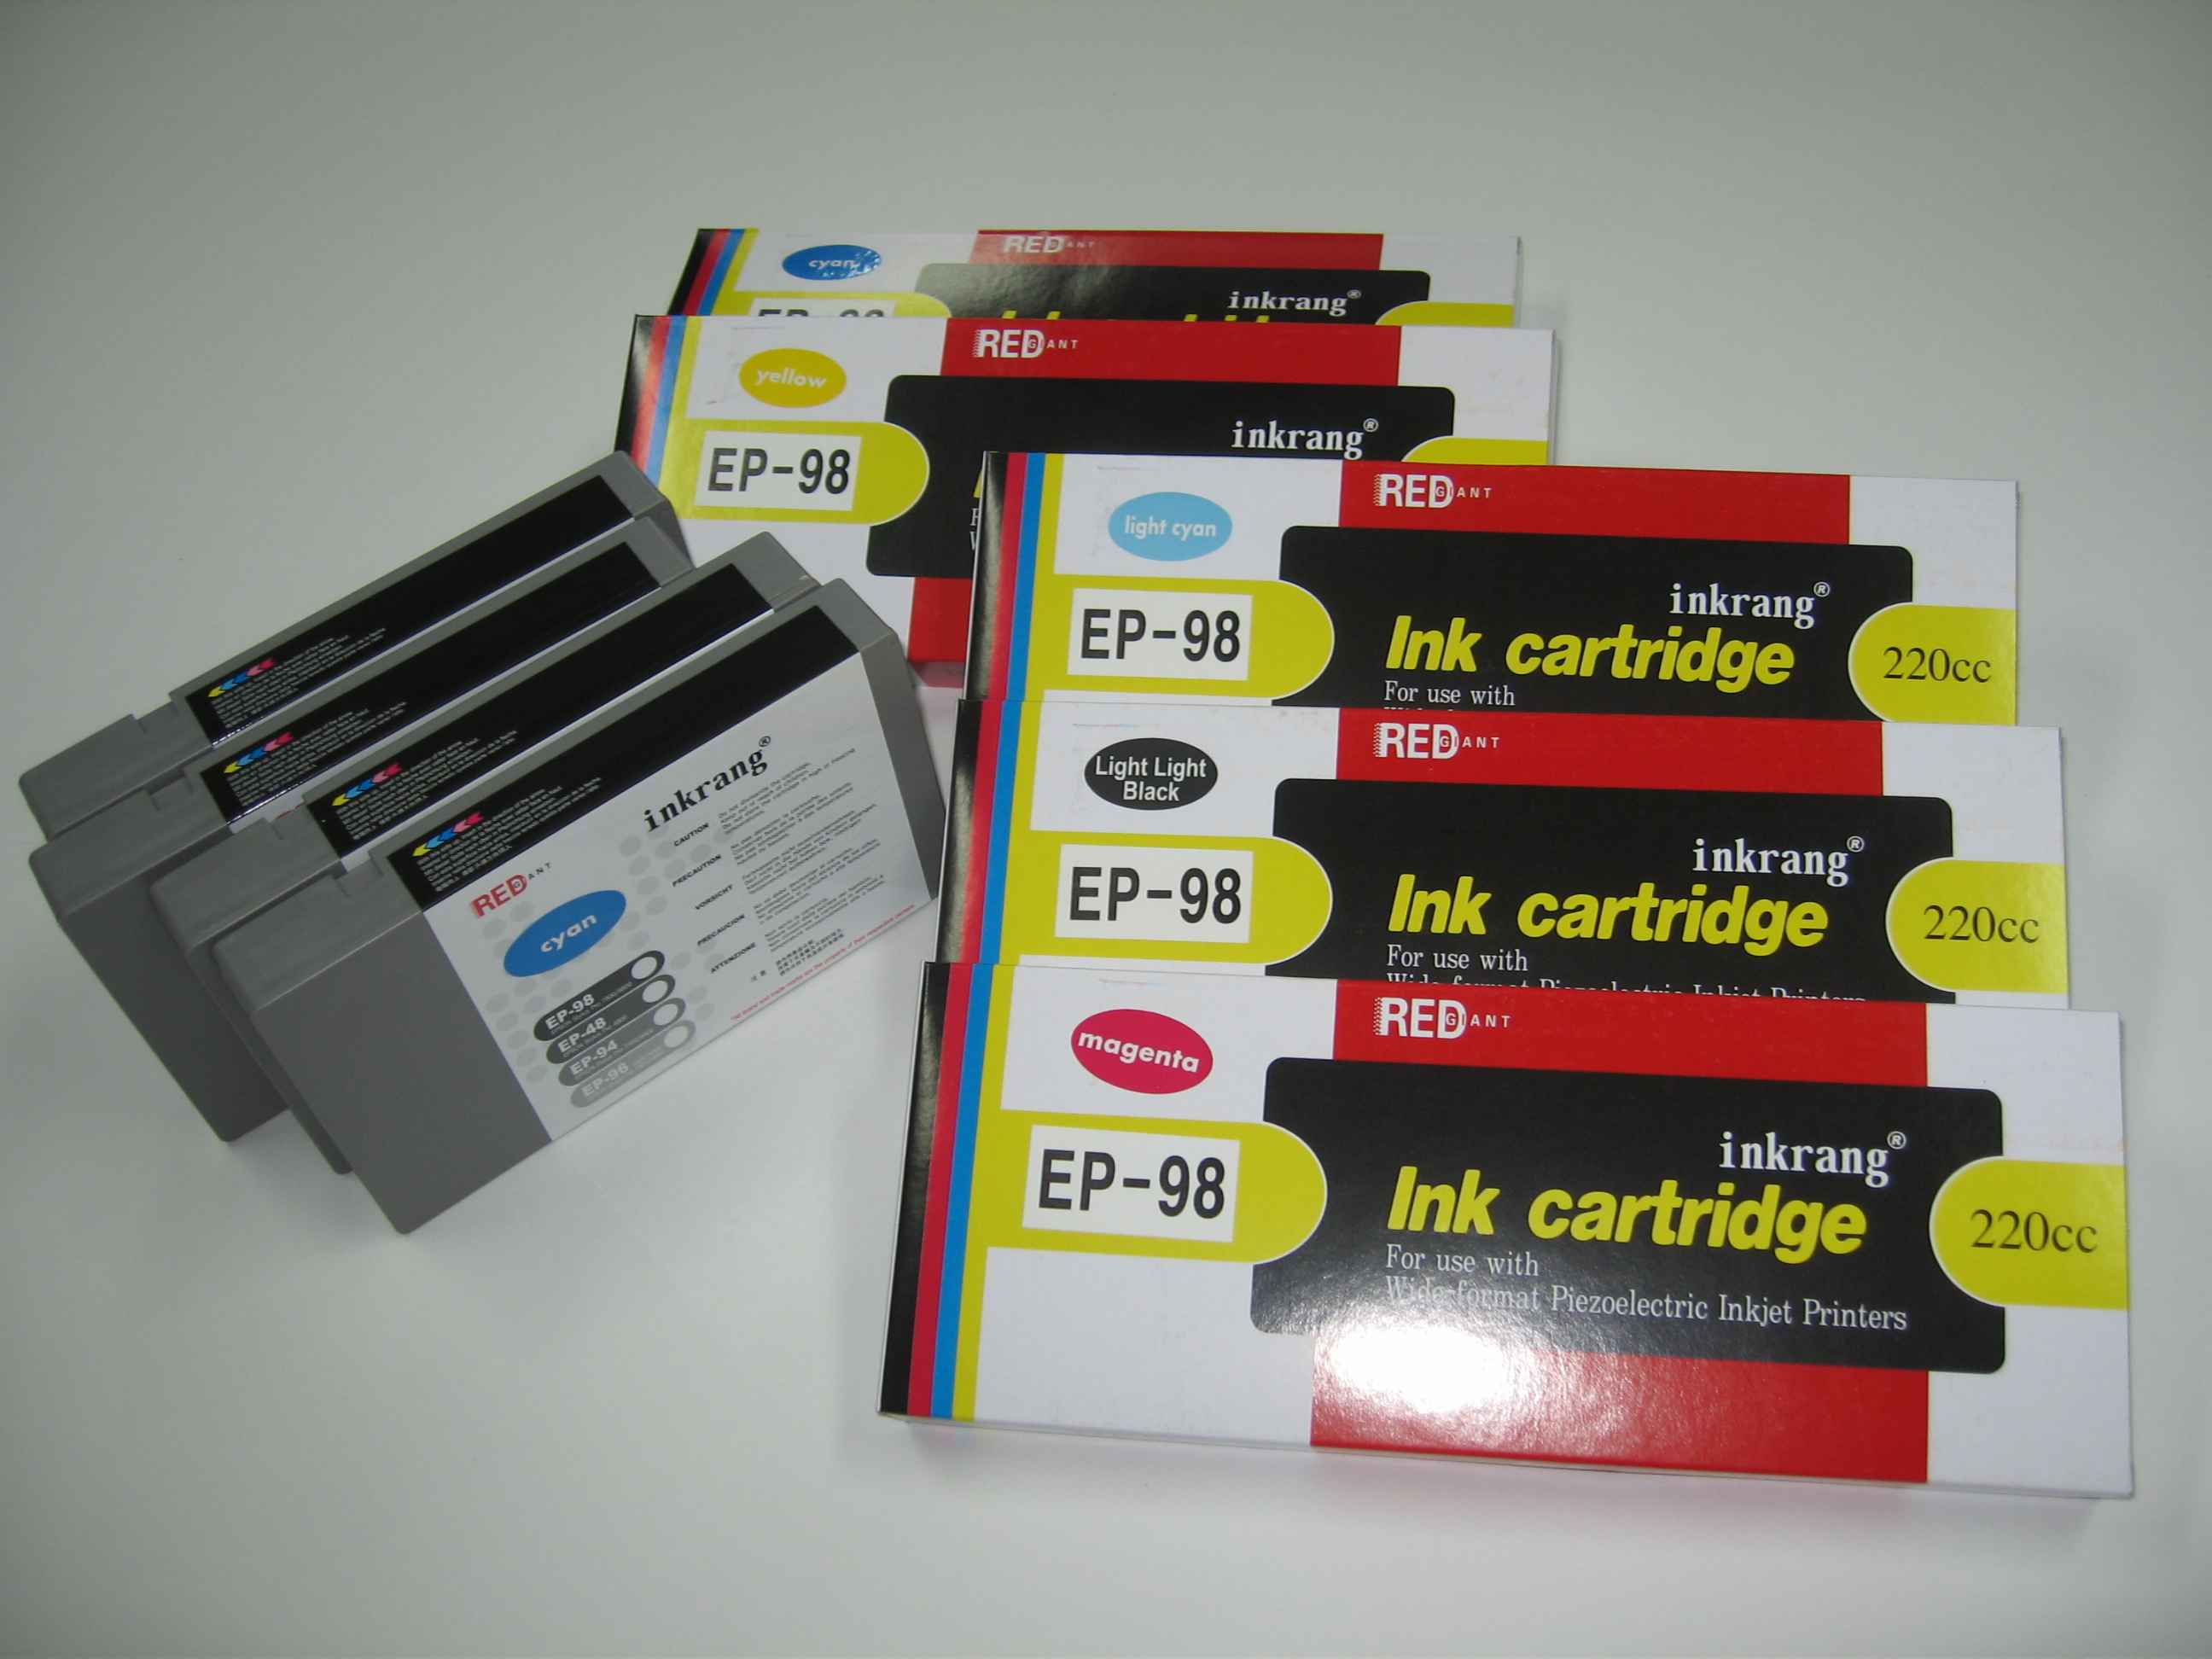 Epson Ultrachrome K3 Ink and Cartridge for Epson 7800/9800, 4800, 7400/9400 printers